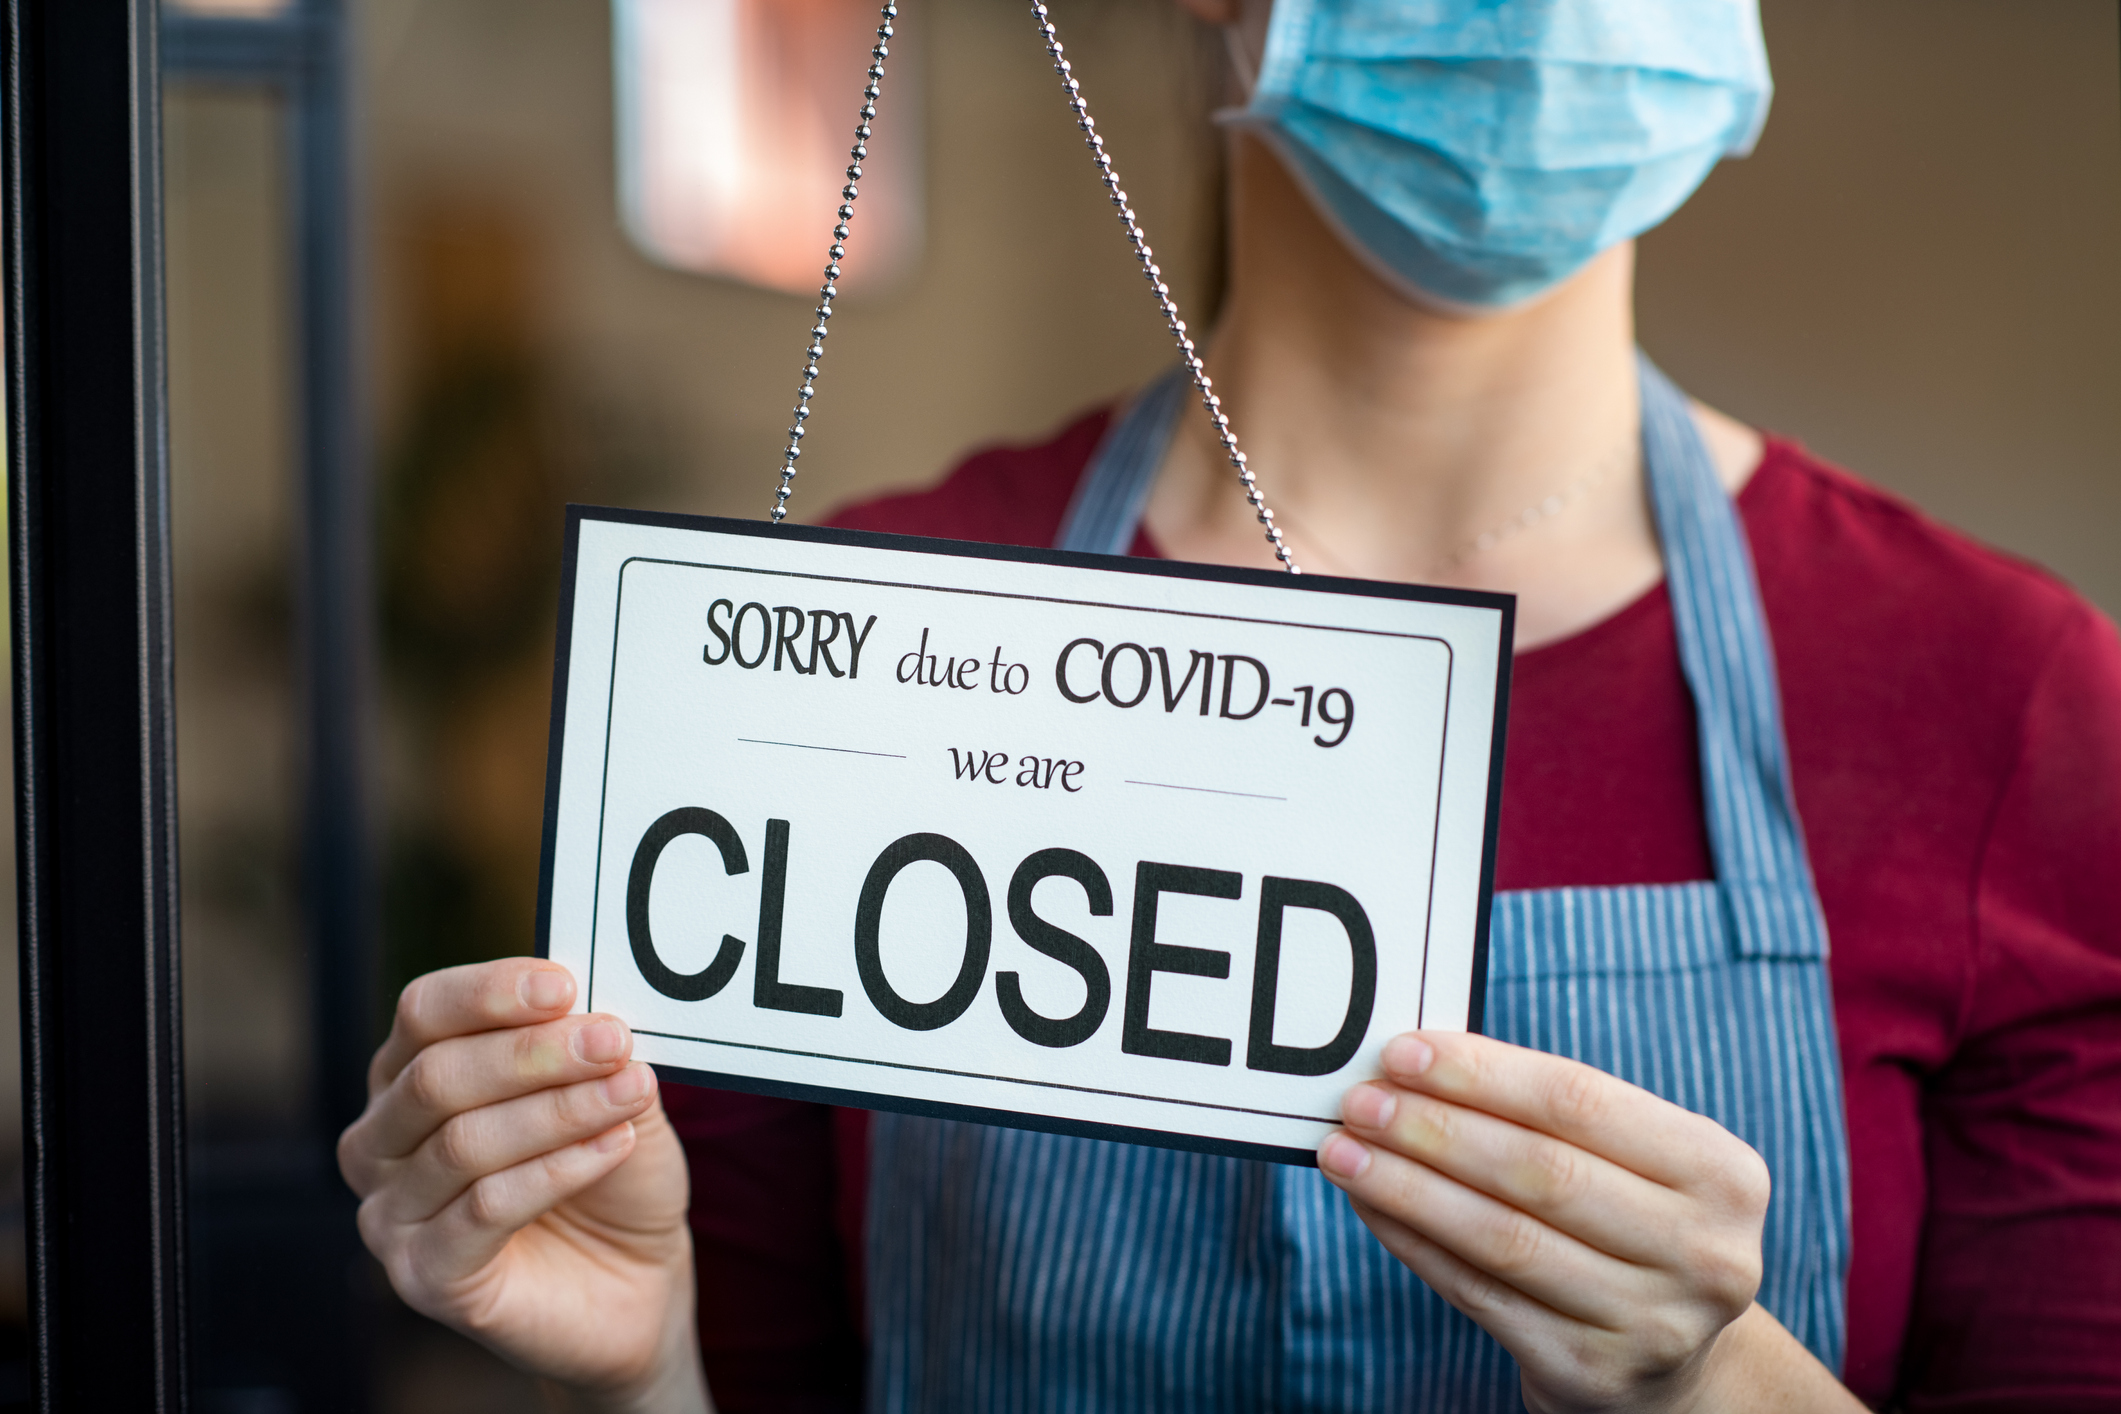 Restaurant owner wearing surgical mask closes her restaurant due to quarantine and coronavirus